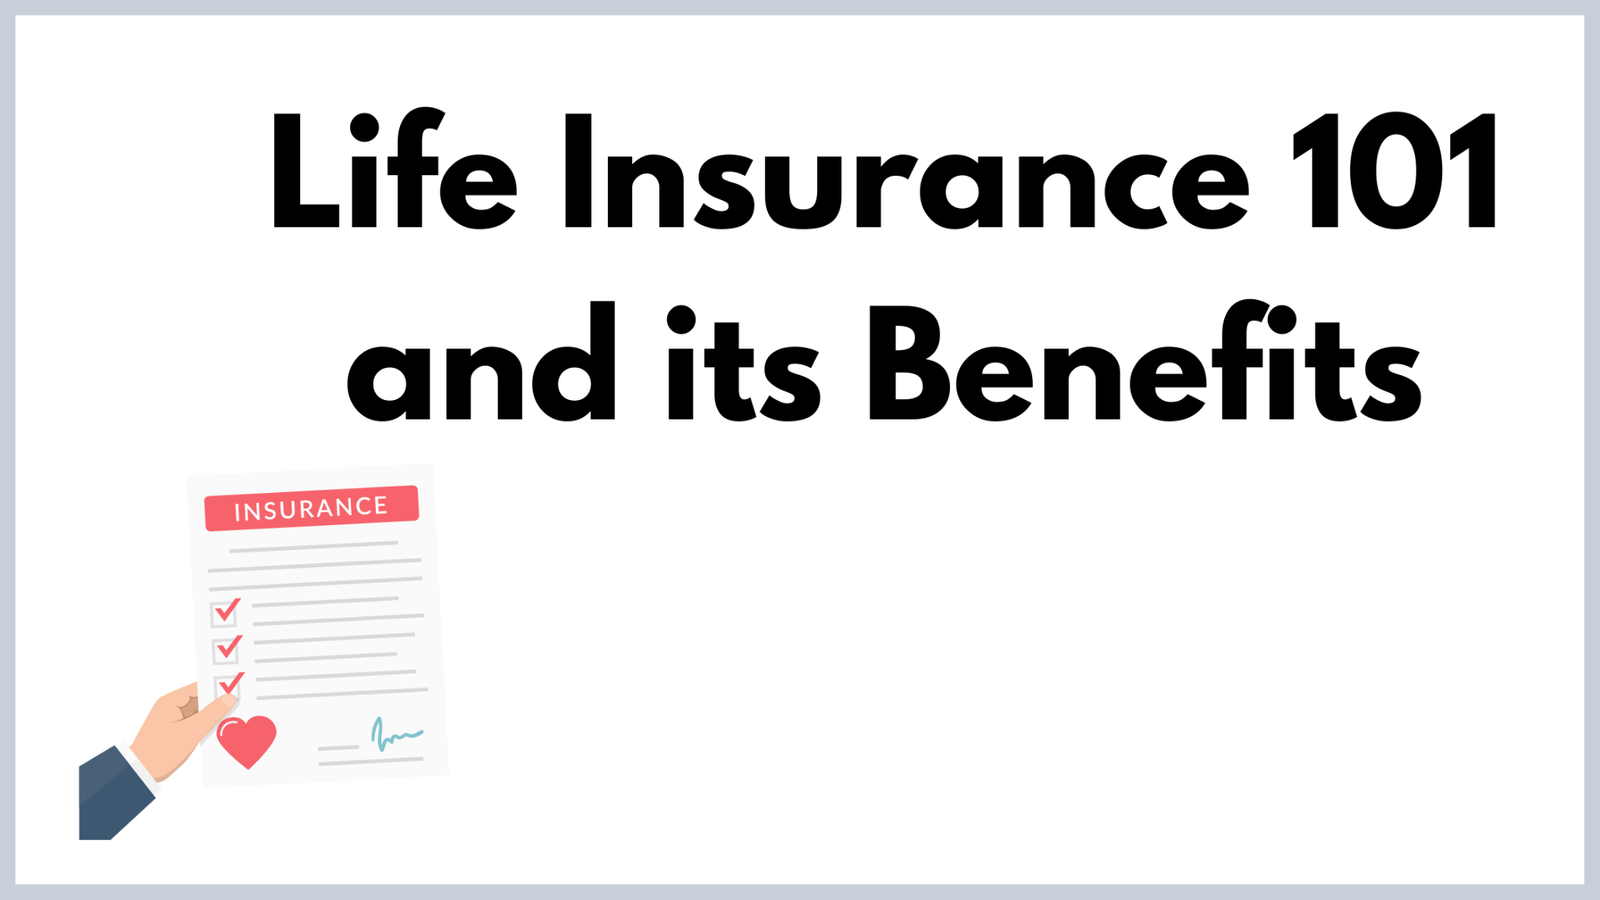 Life Insurance 101 and its Benefits